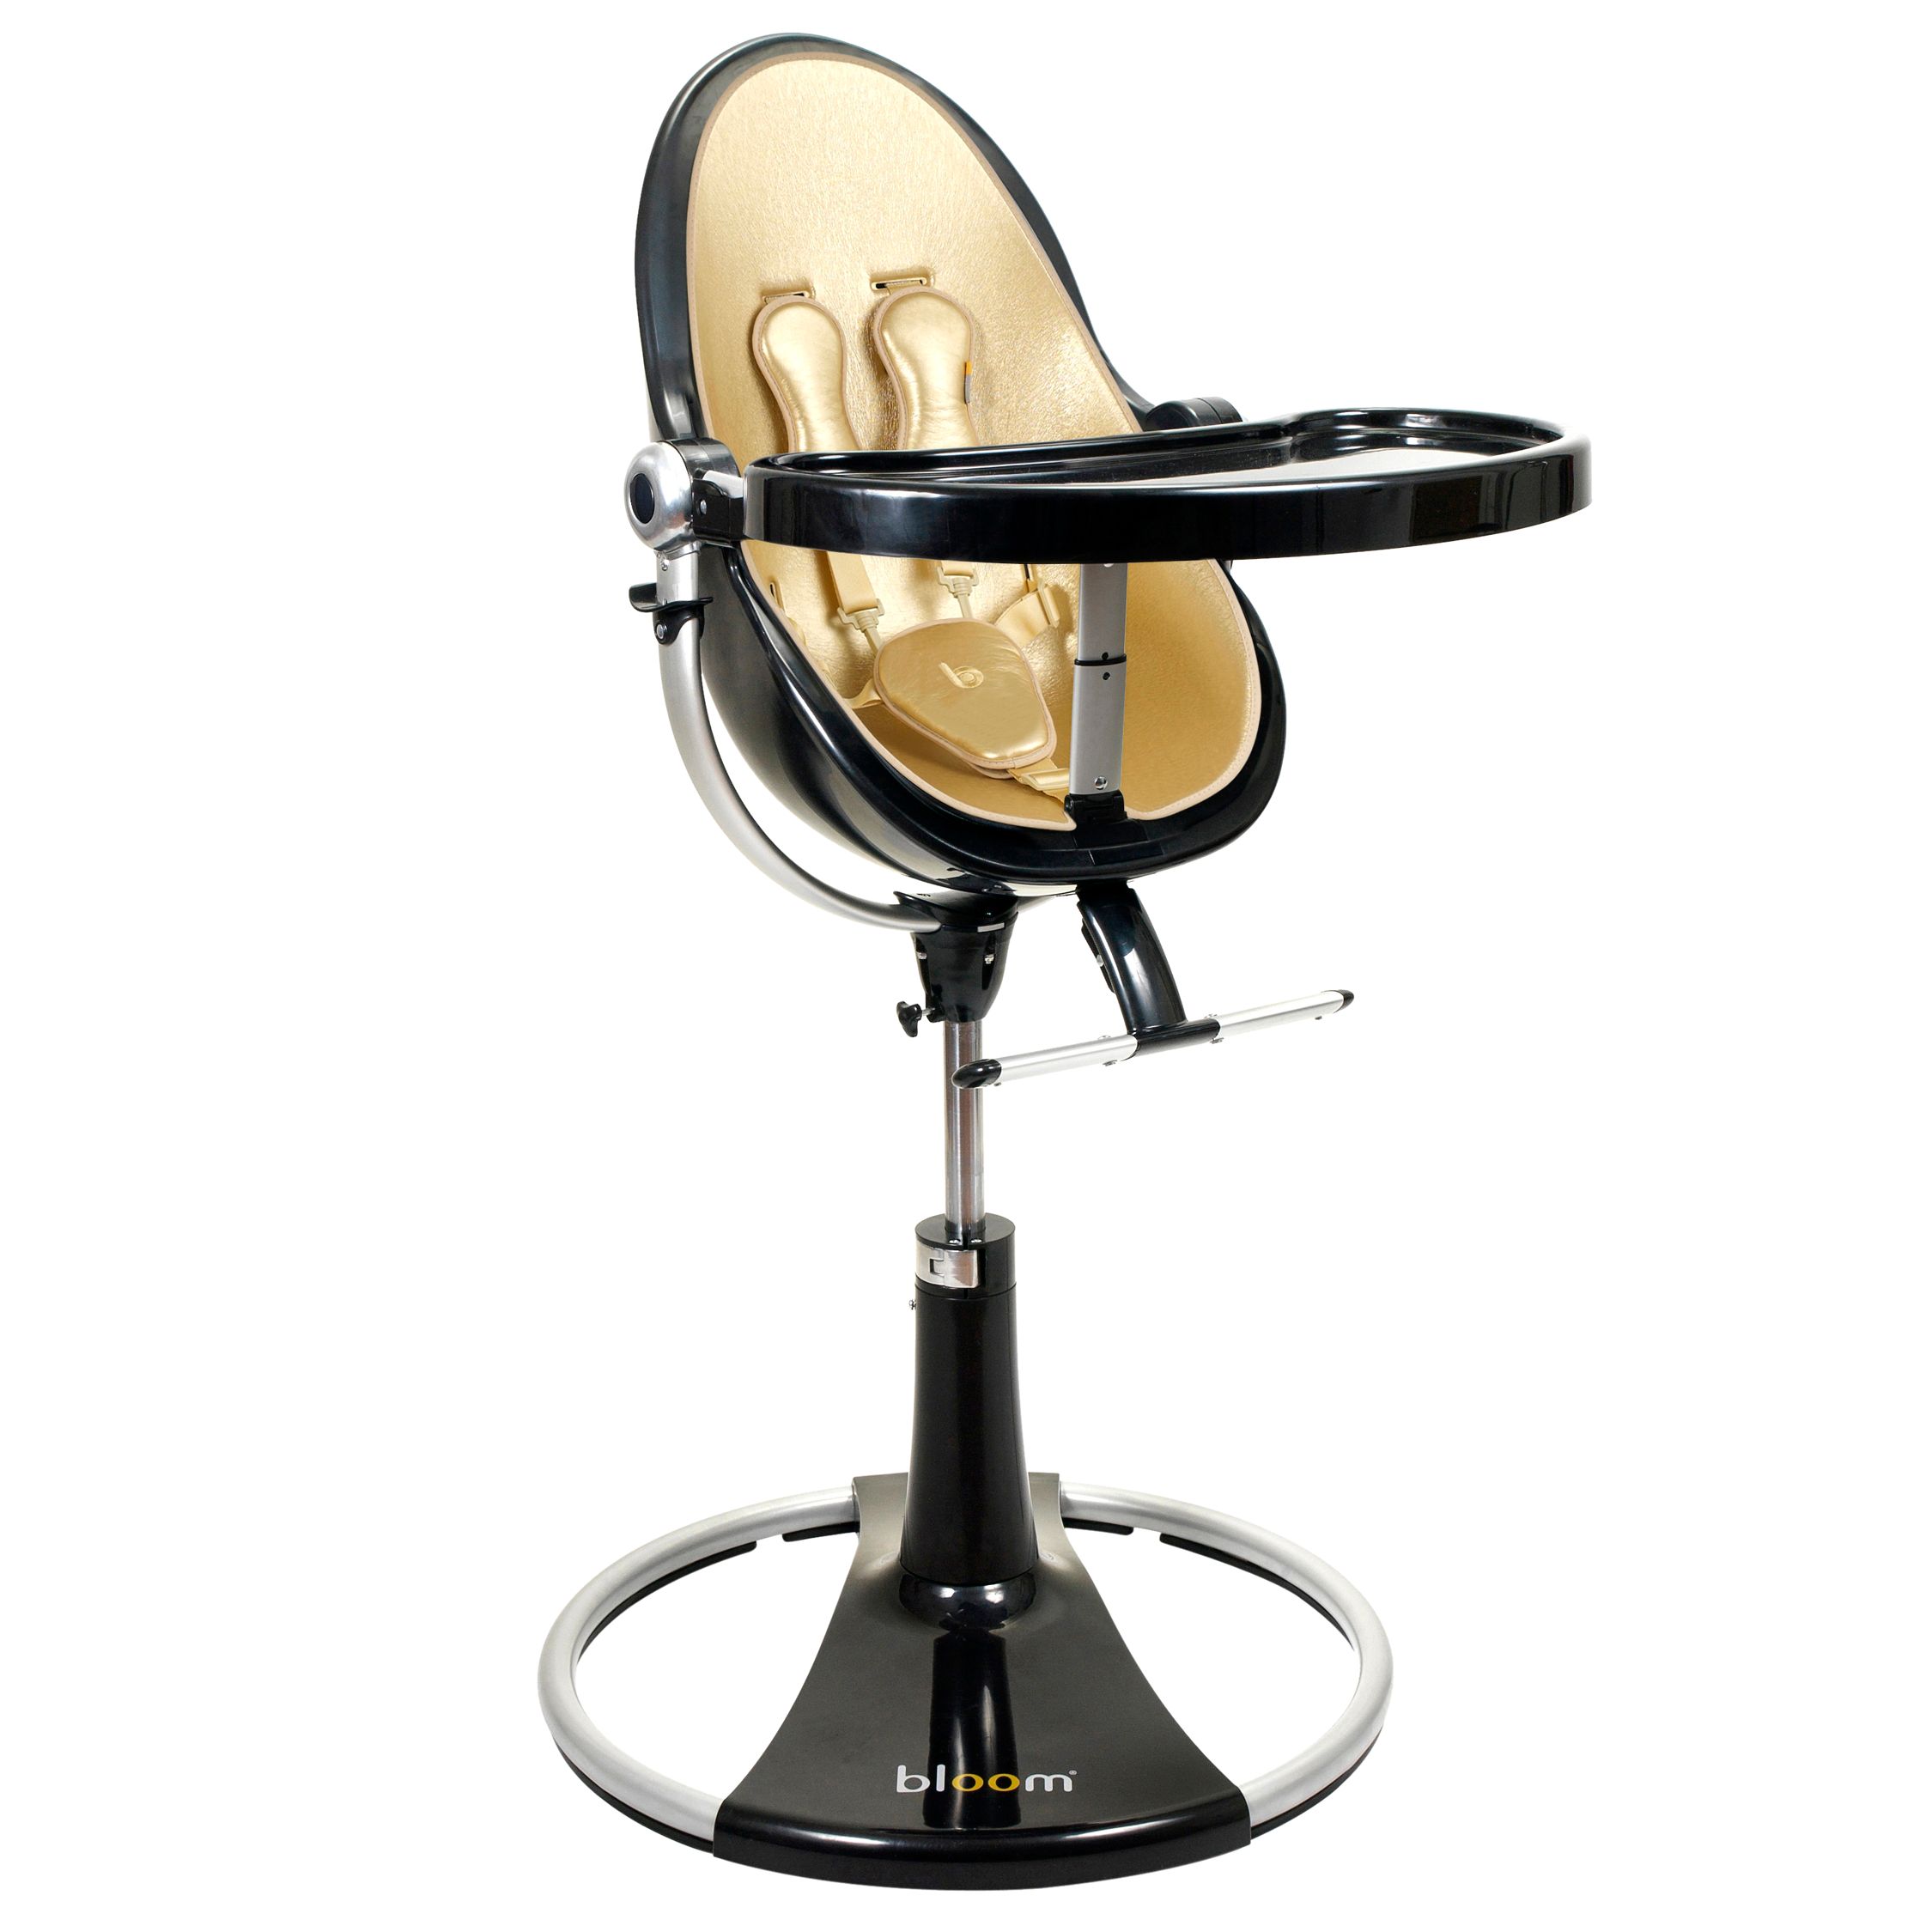 bloom Fresco Loft Contemporary Leatherette Baby Chair, Ebony Black with Solar Gold at John Lewis